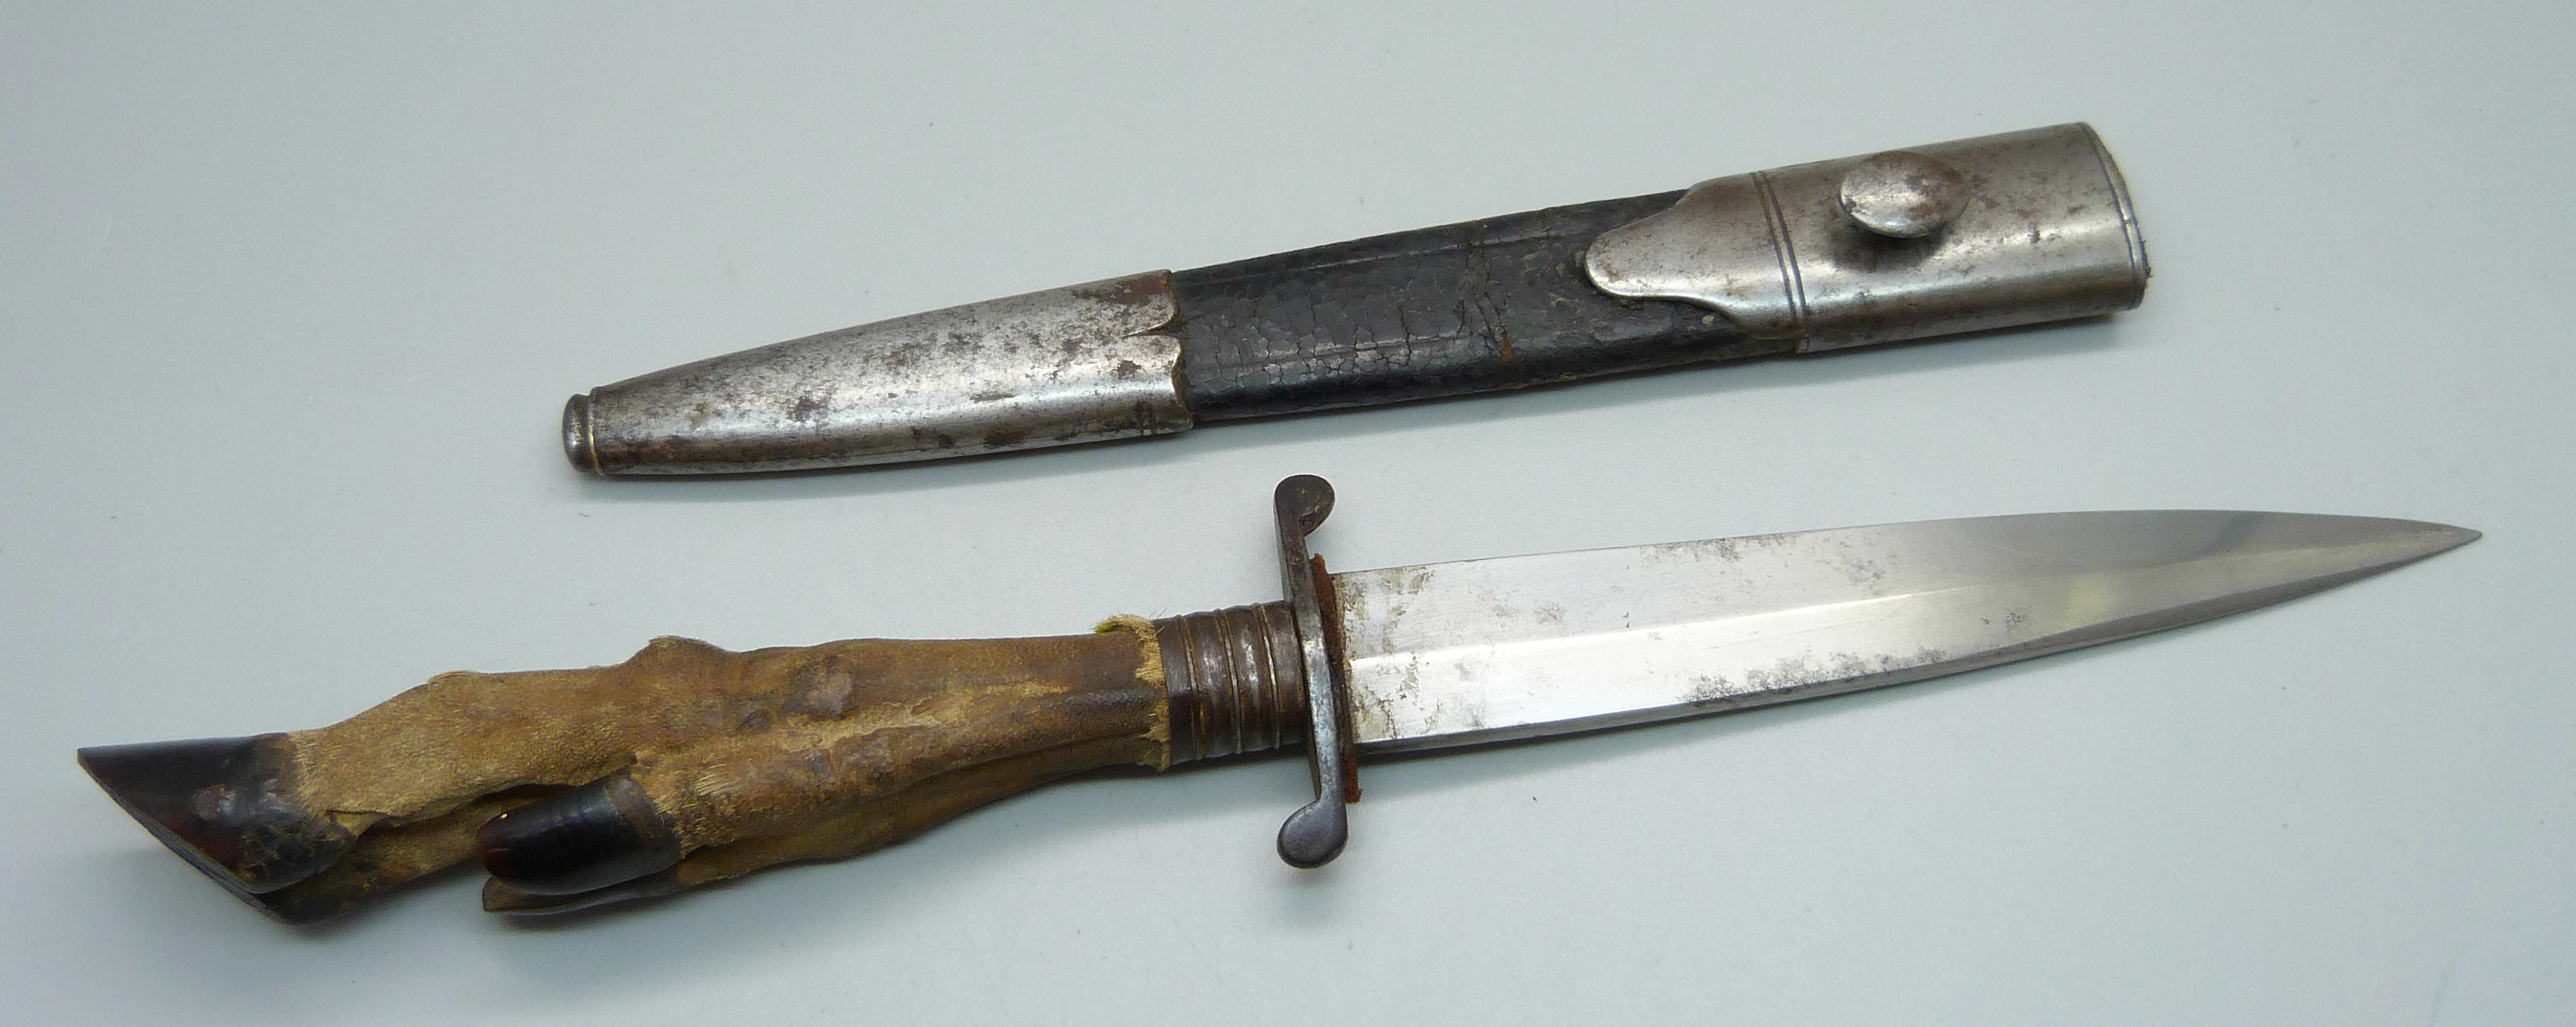 A German WWI trench knife with scabbard